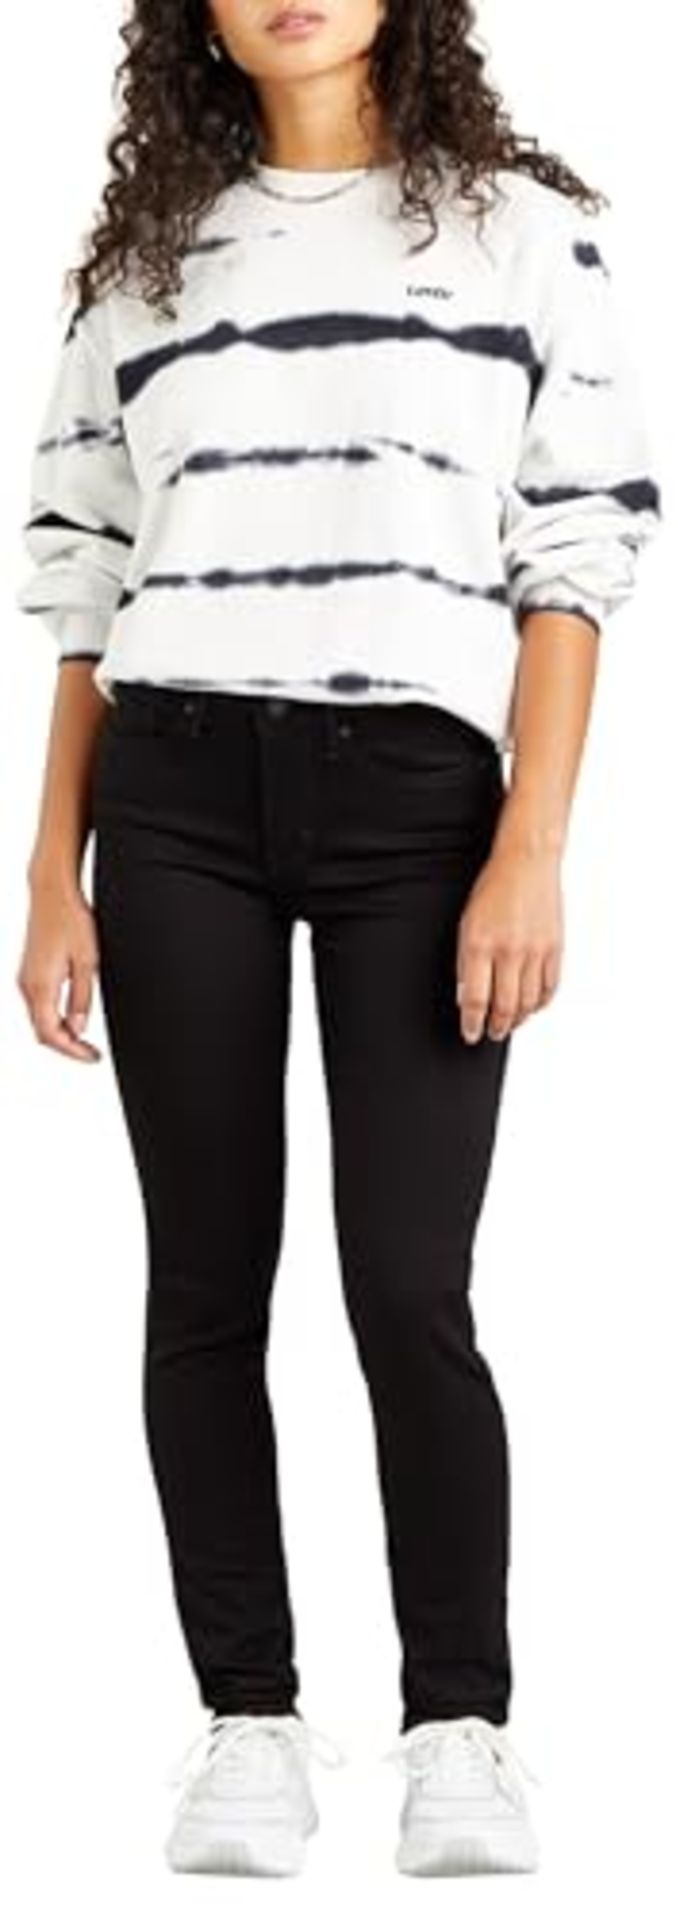 RRP £71.00 Levi's 311 Shaping Skinny Jeans for Women, Black and Black, 26W/30L